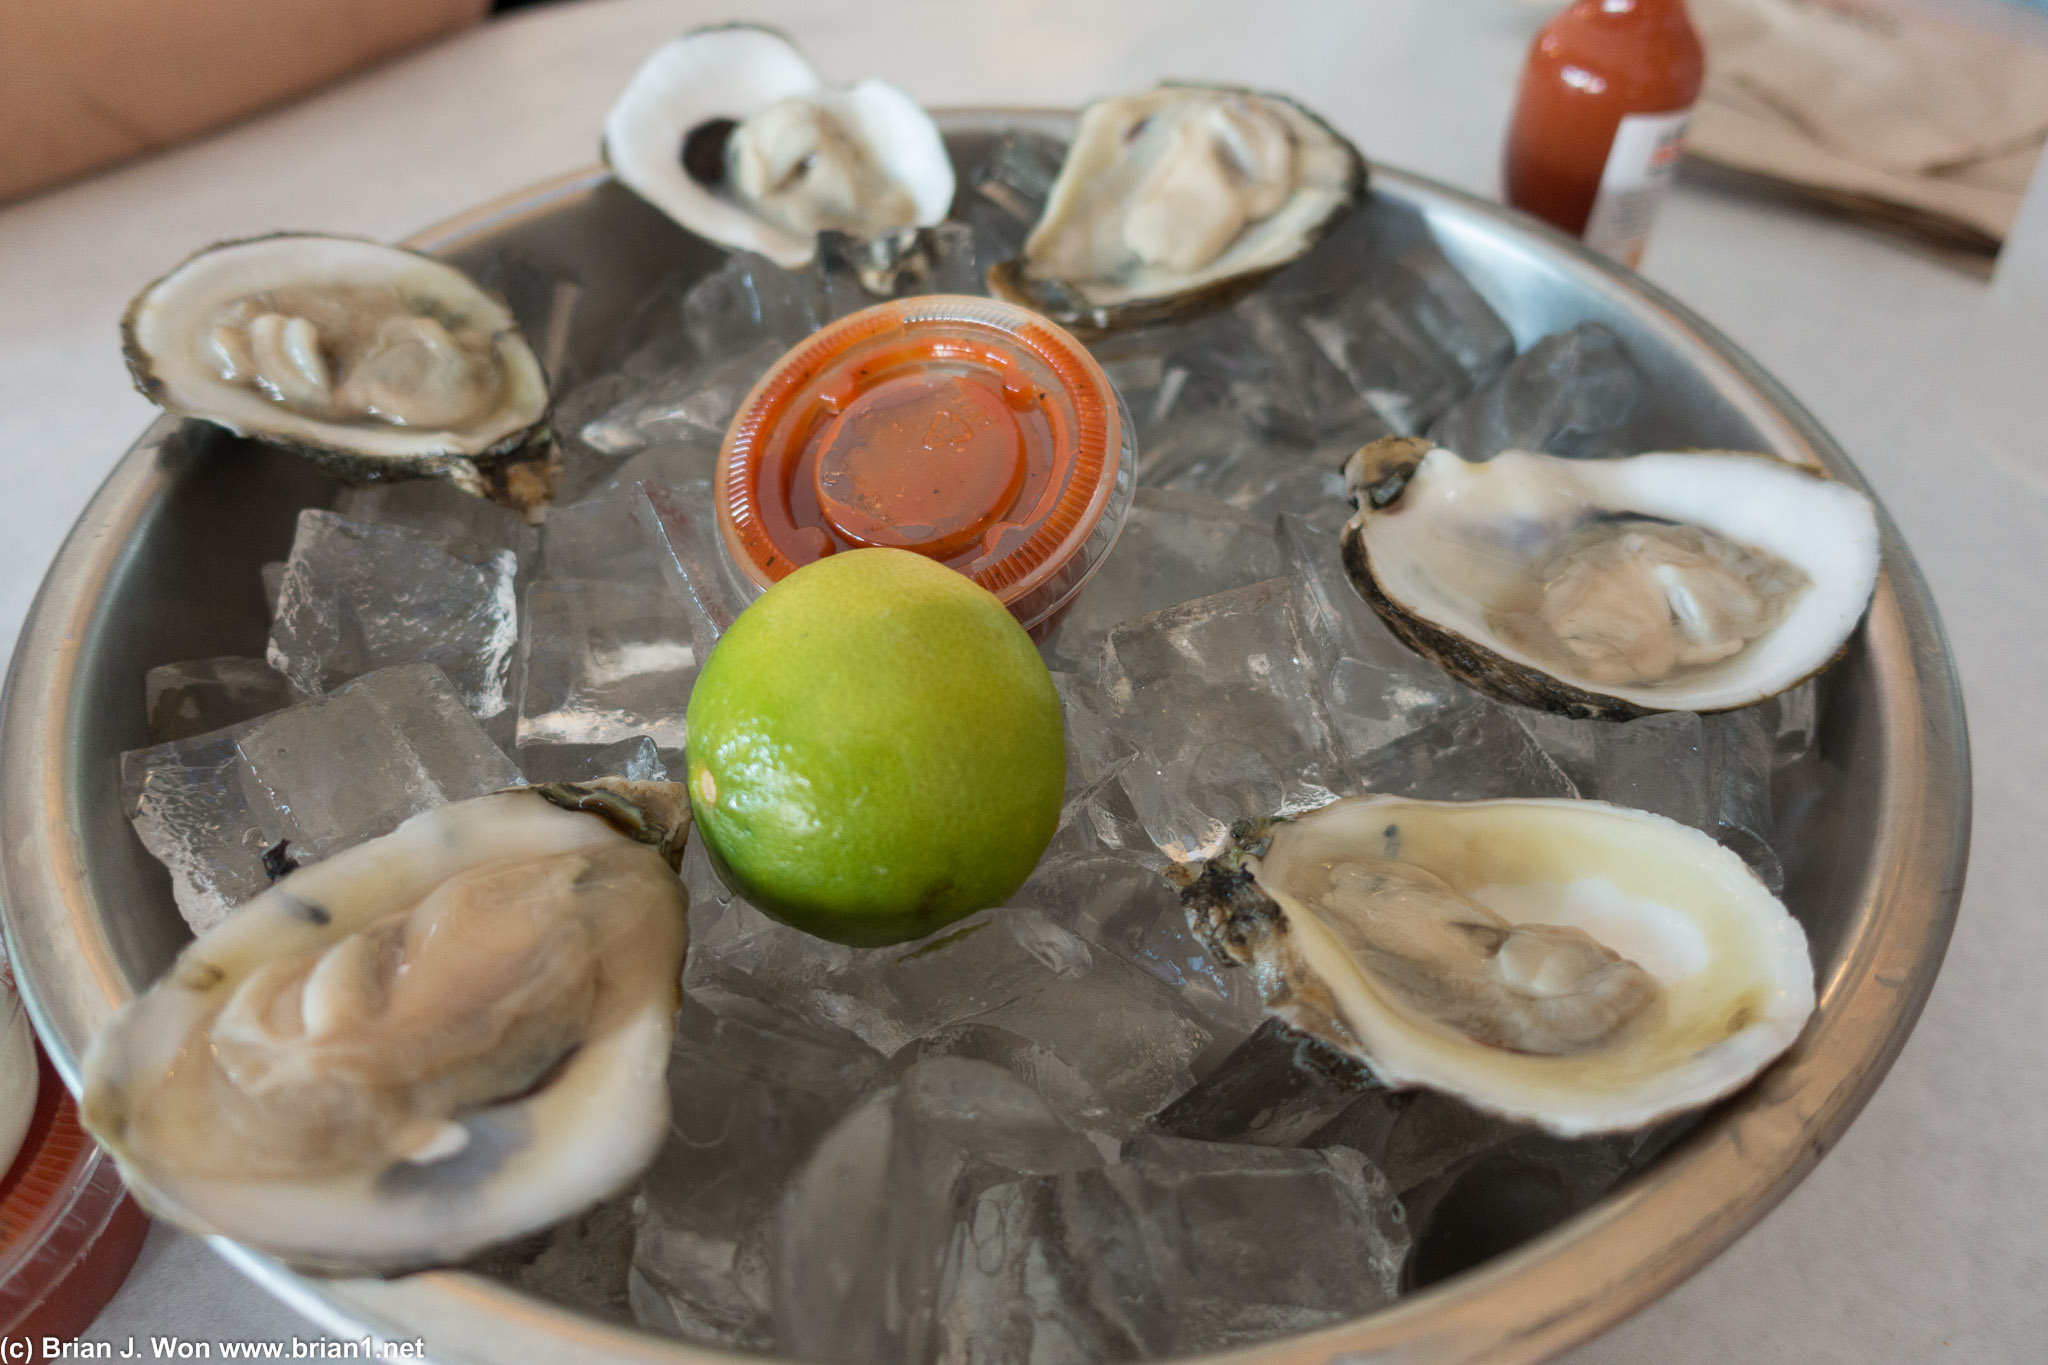 Not much flavor in the oysters.